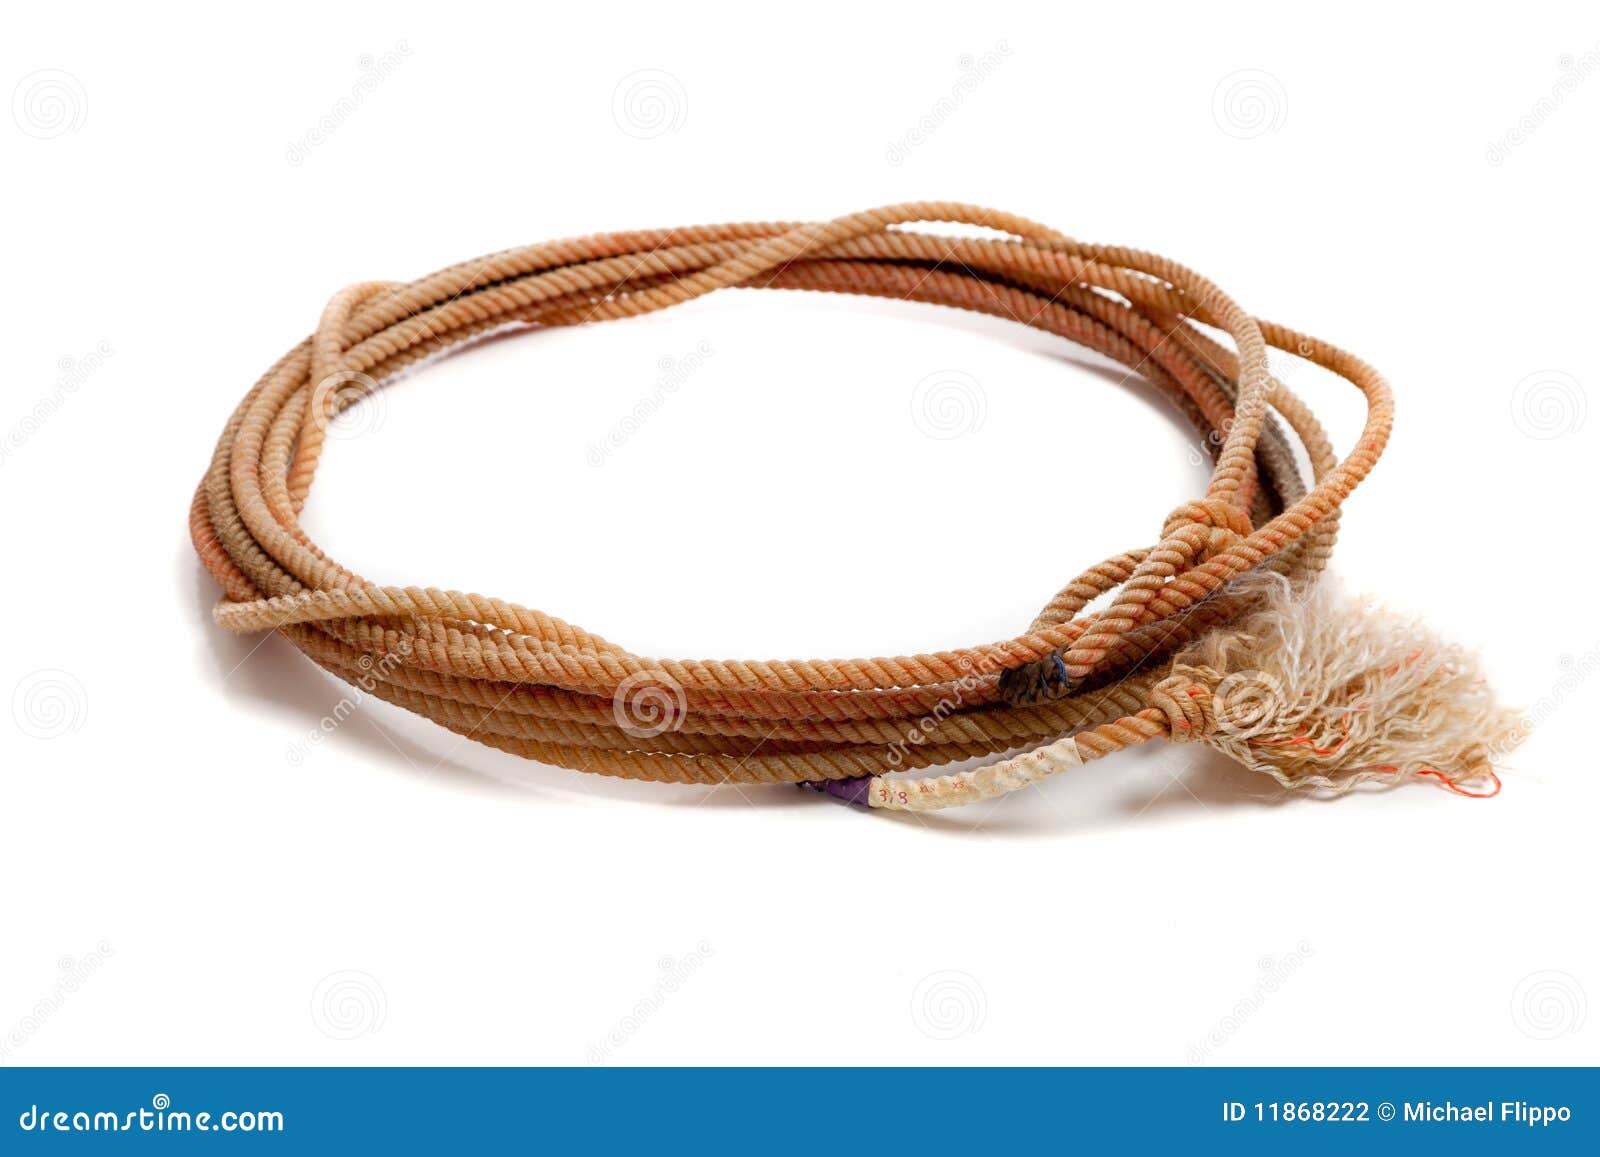 Western Lasso on a White Background Stock Photo - Image of string